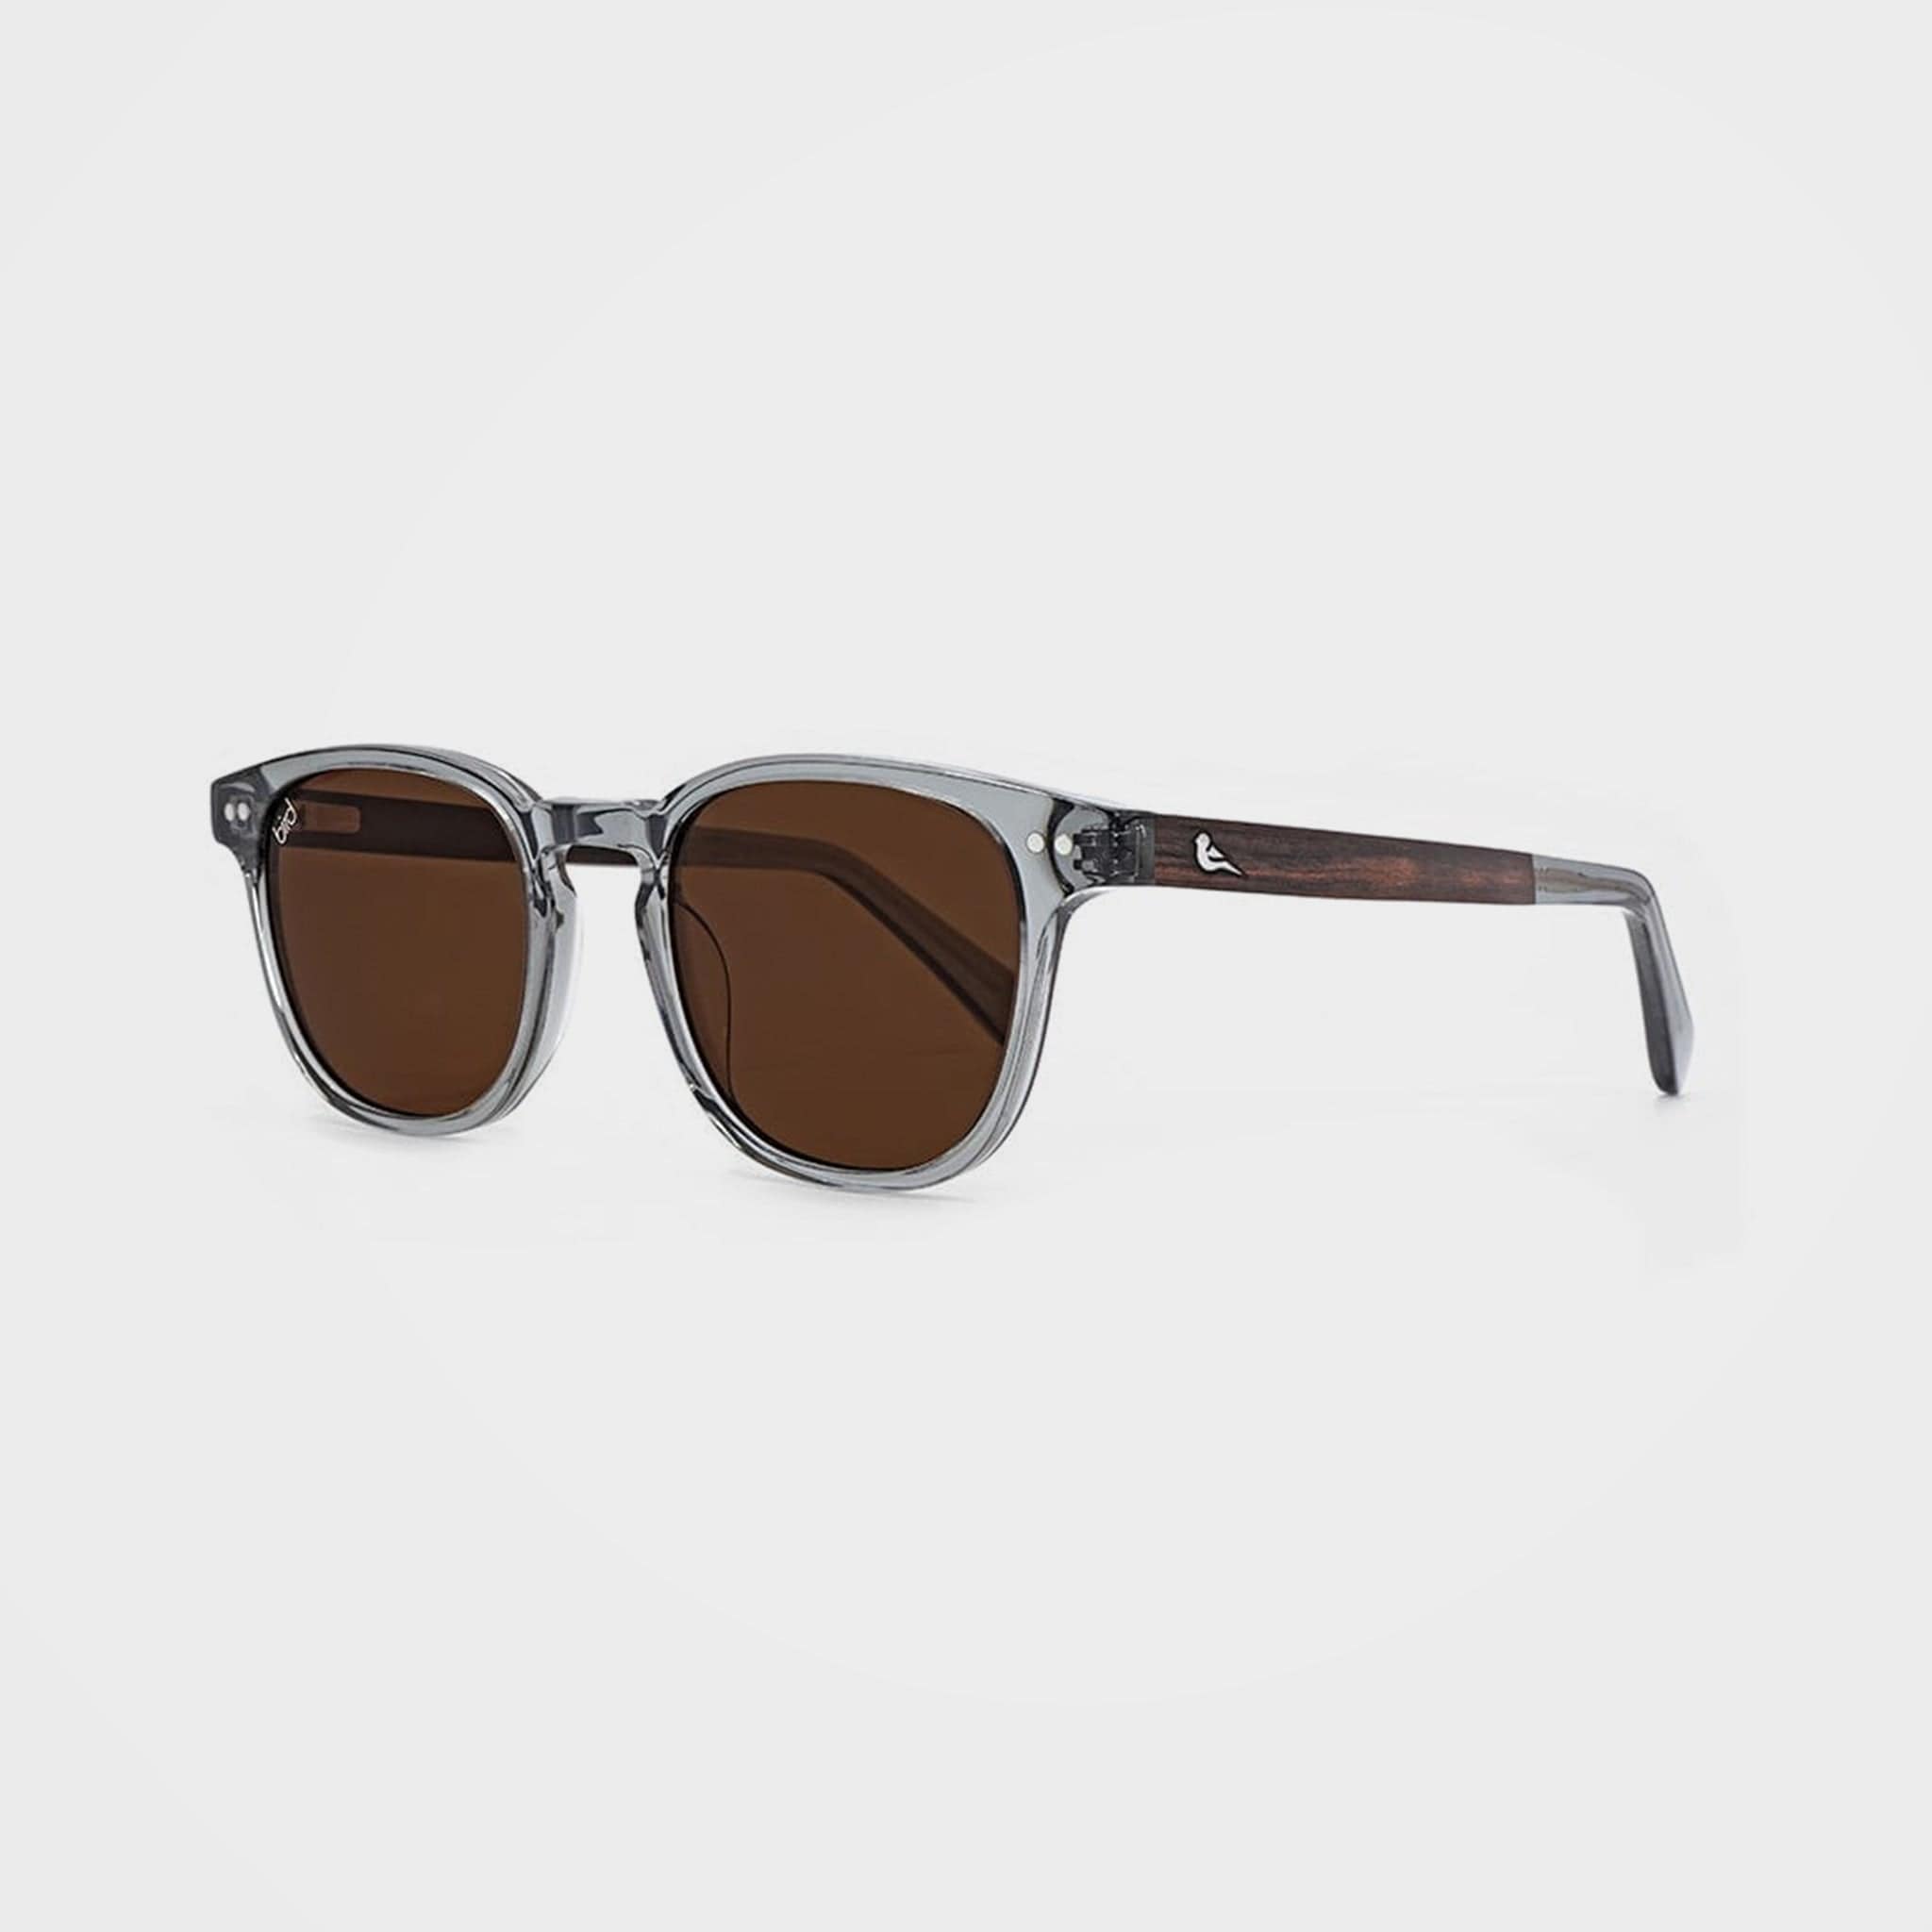 Best sunglasses for round-shaped face